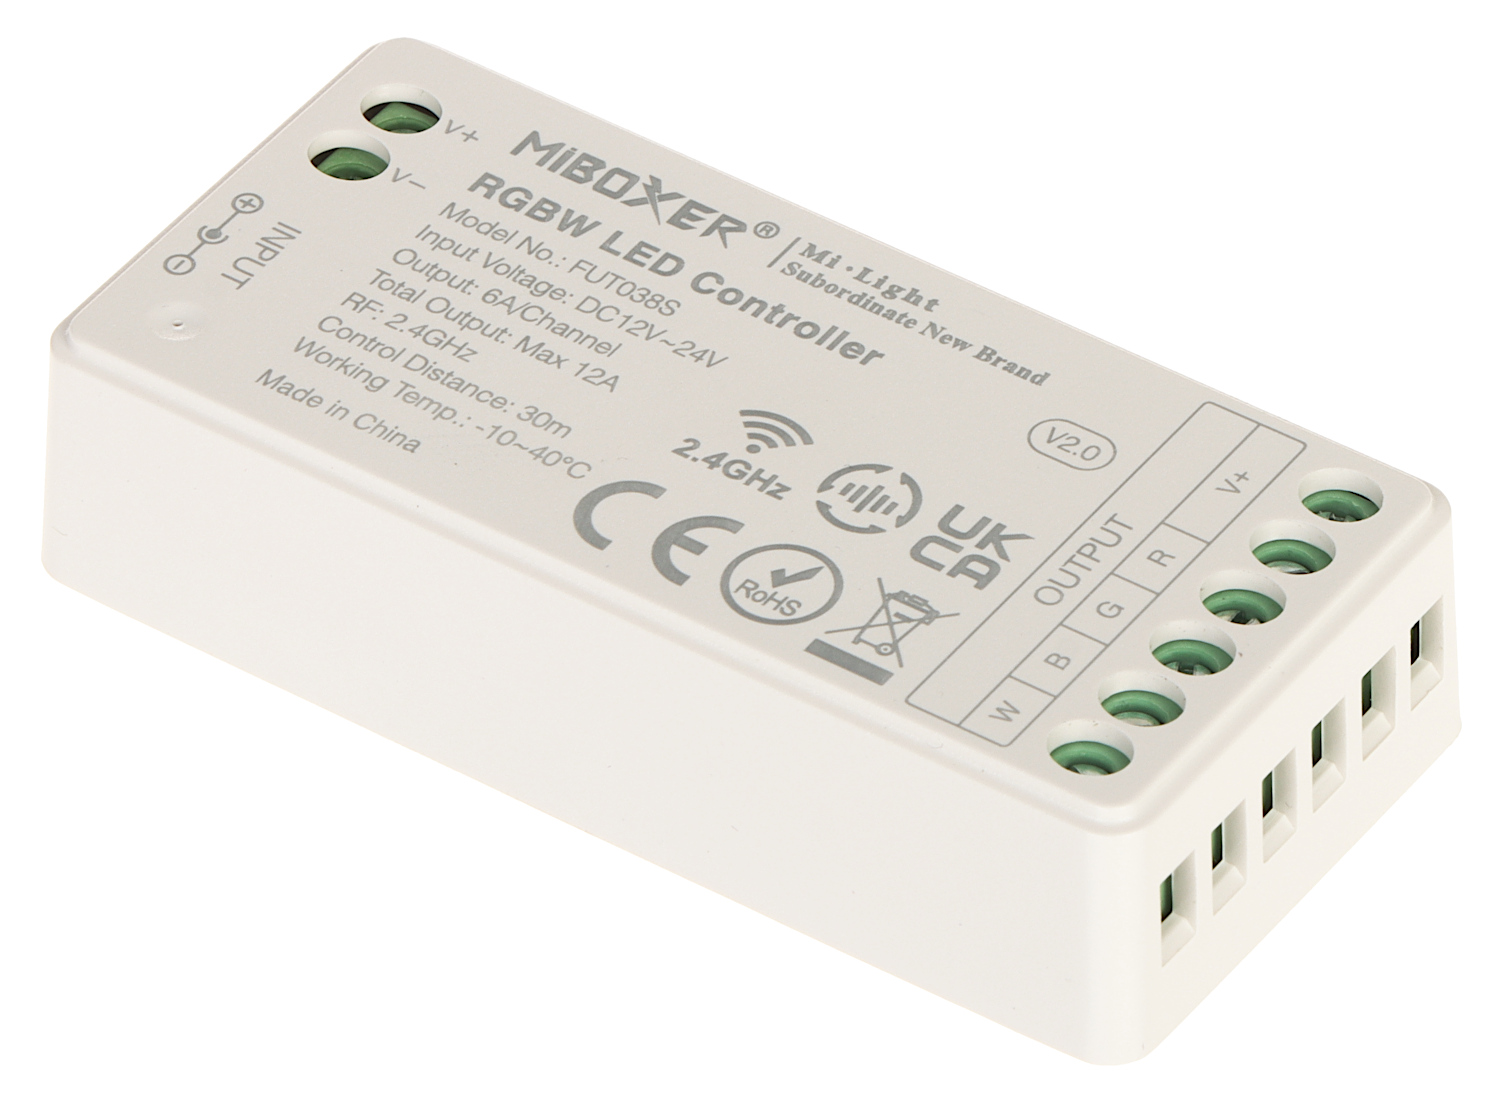 LED LIGHTING CONTROLLER LED-RGBW-WC/RF2 2.4 GHz, RGBW ... - Controllers,  Remote Controls and LED Accessories - Delta